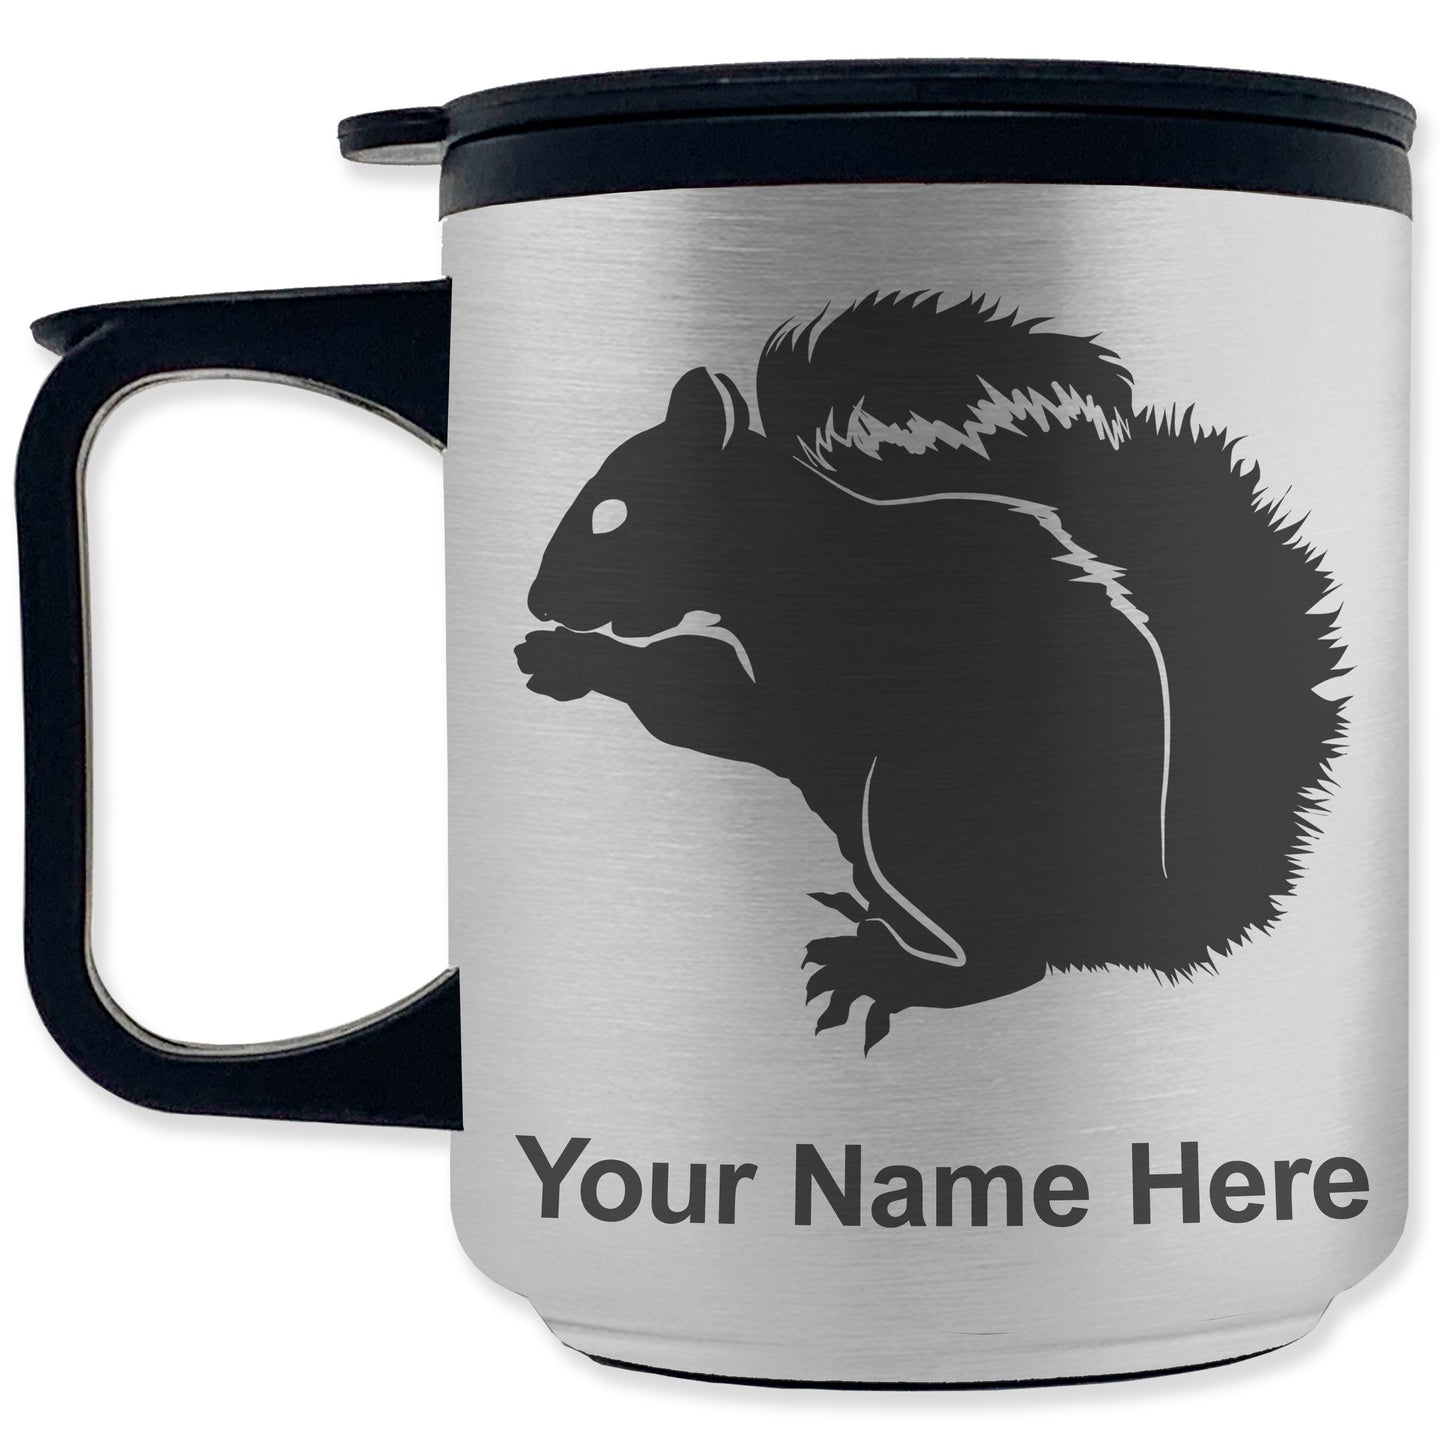 Coffee Travel Mug, Squirrel, Personalized Engraving Included